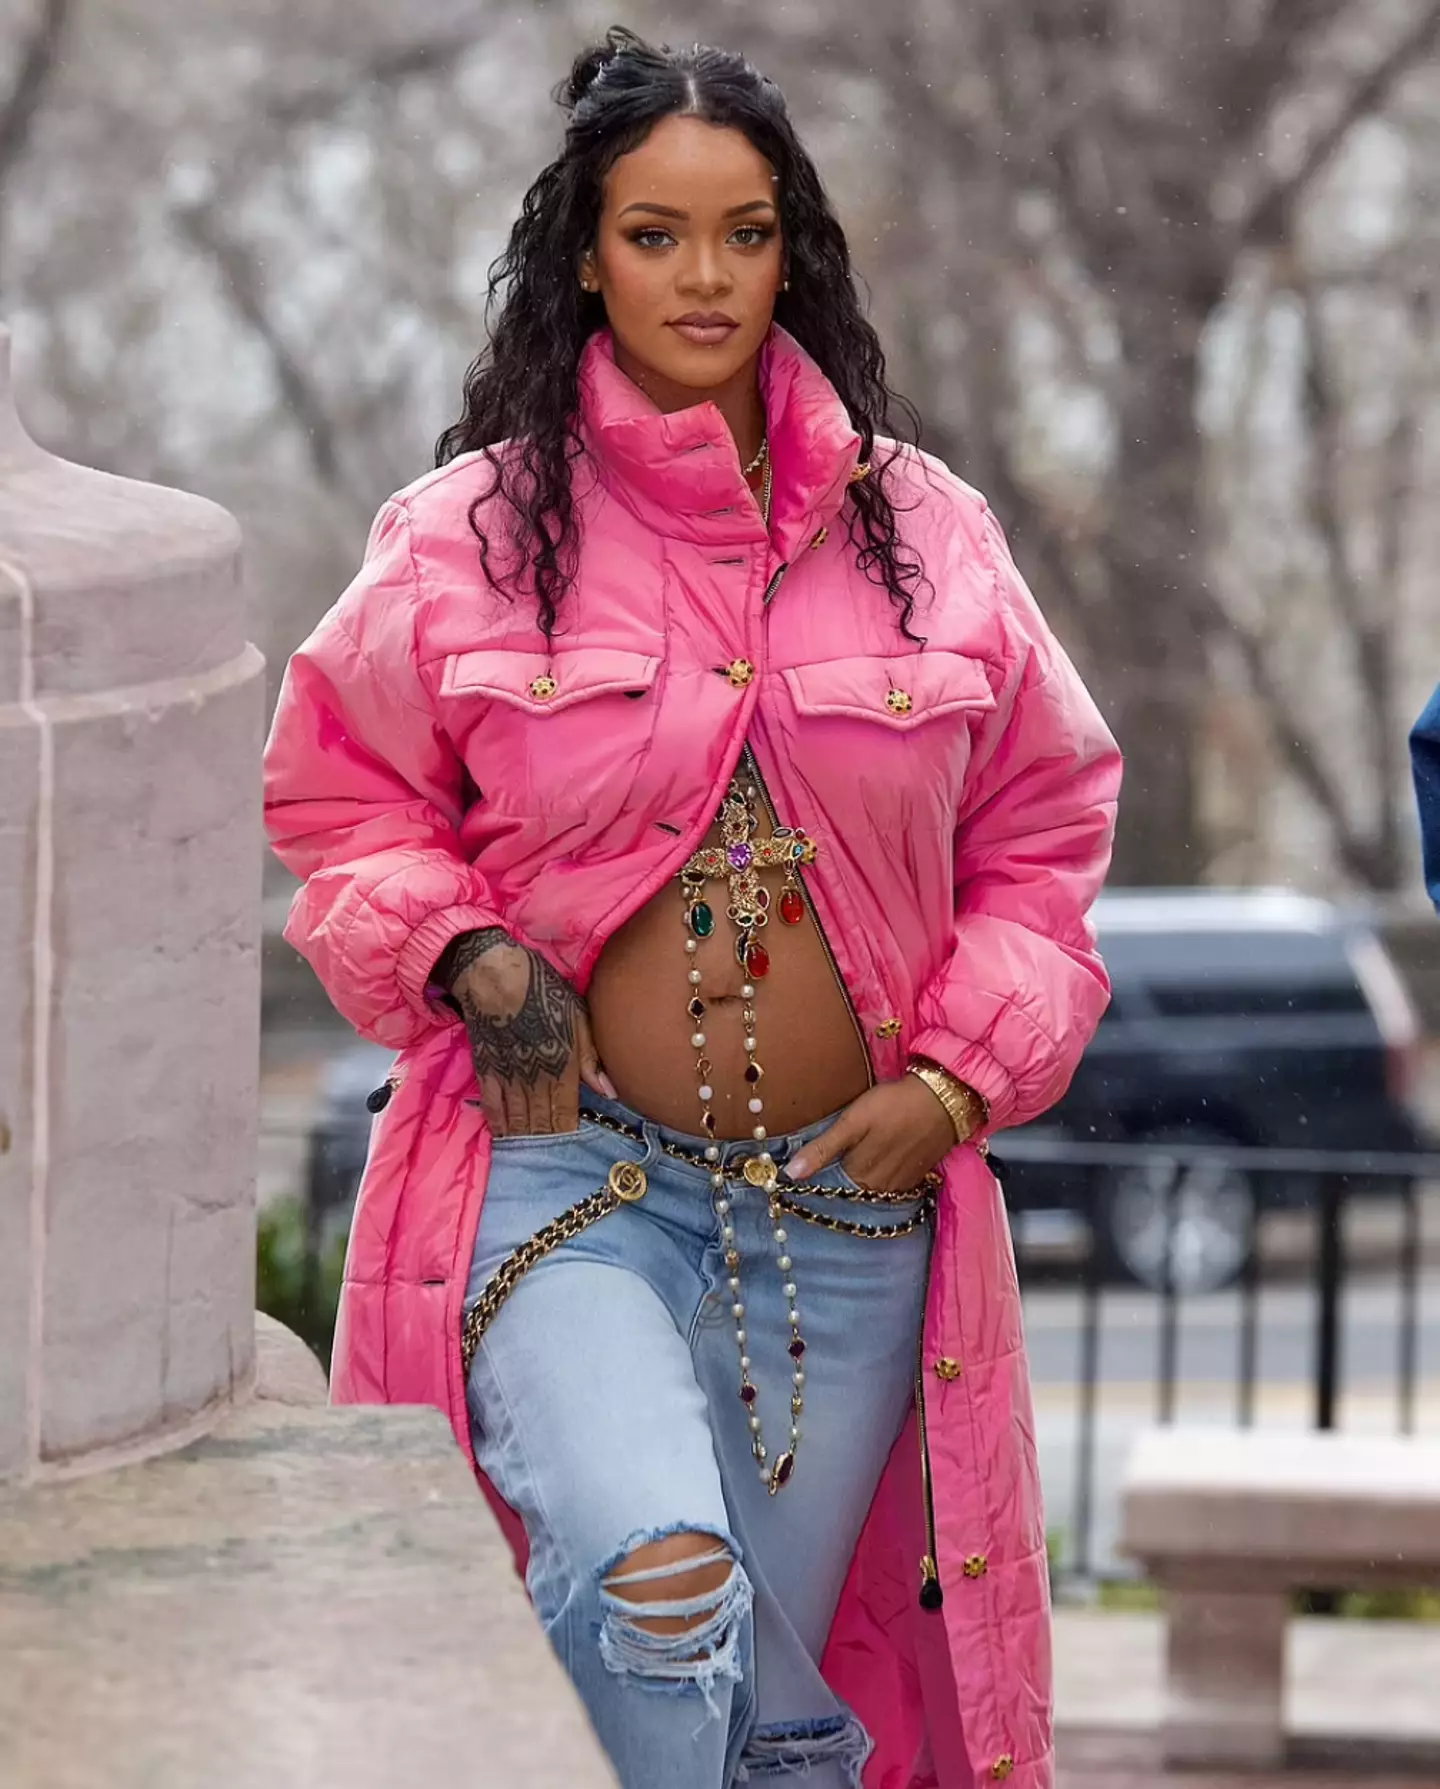 Rihanna unveiled she was pregnant (